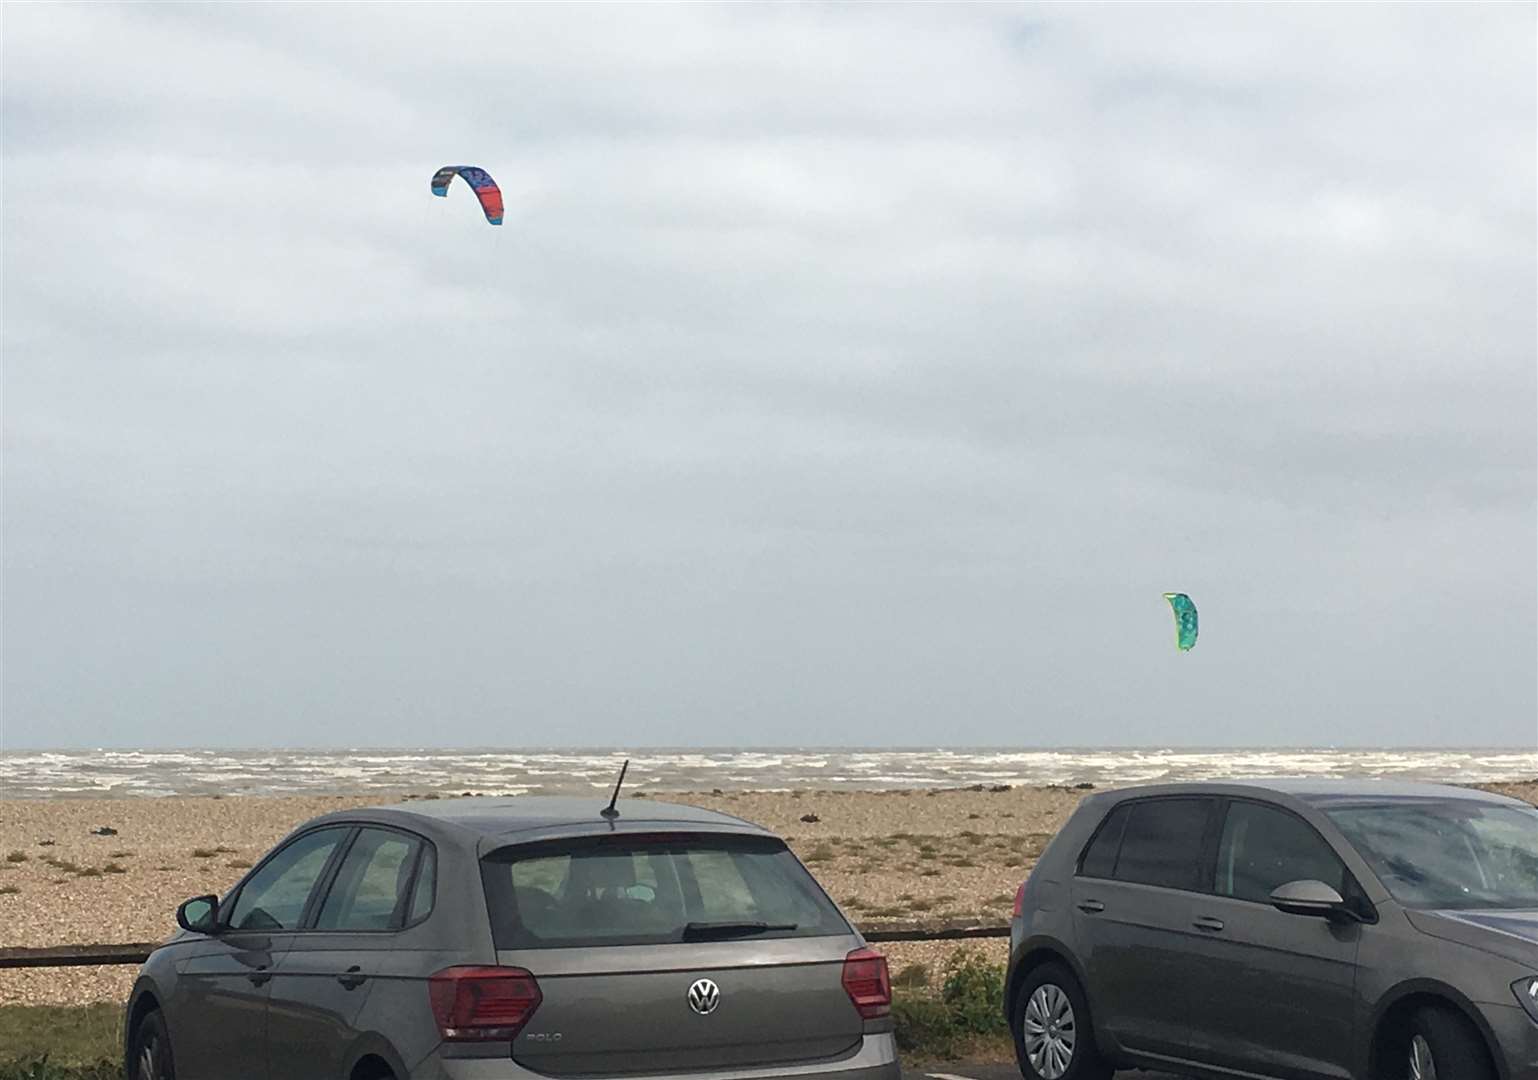 Kite surfers at Greatstone beach were told to go home on Monday. Picture: FHDC